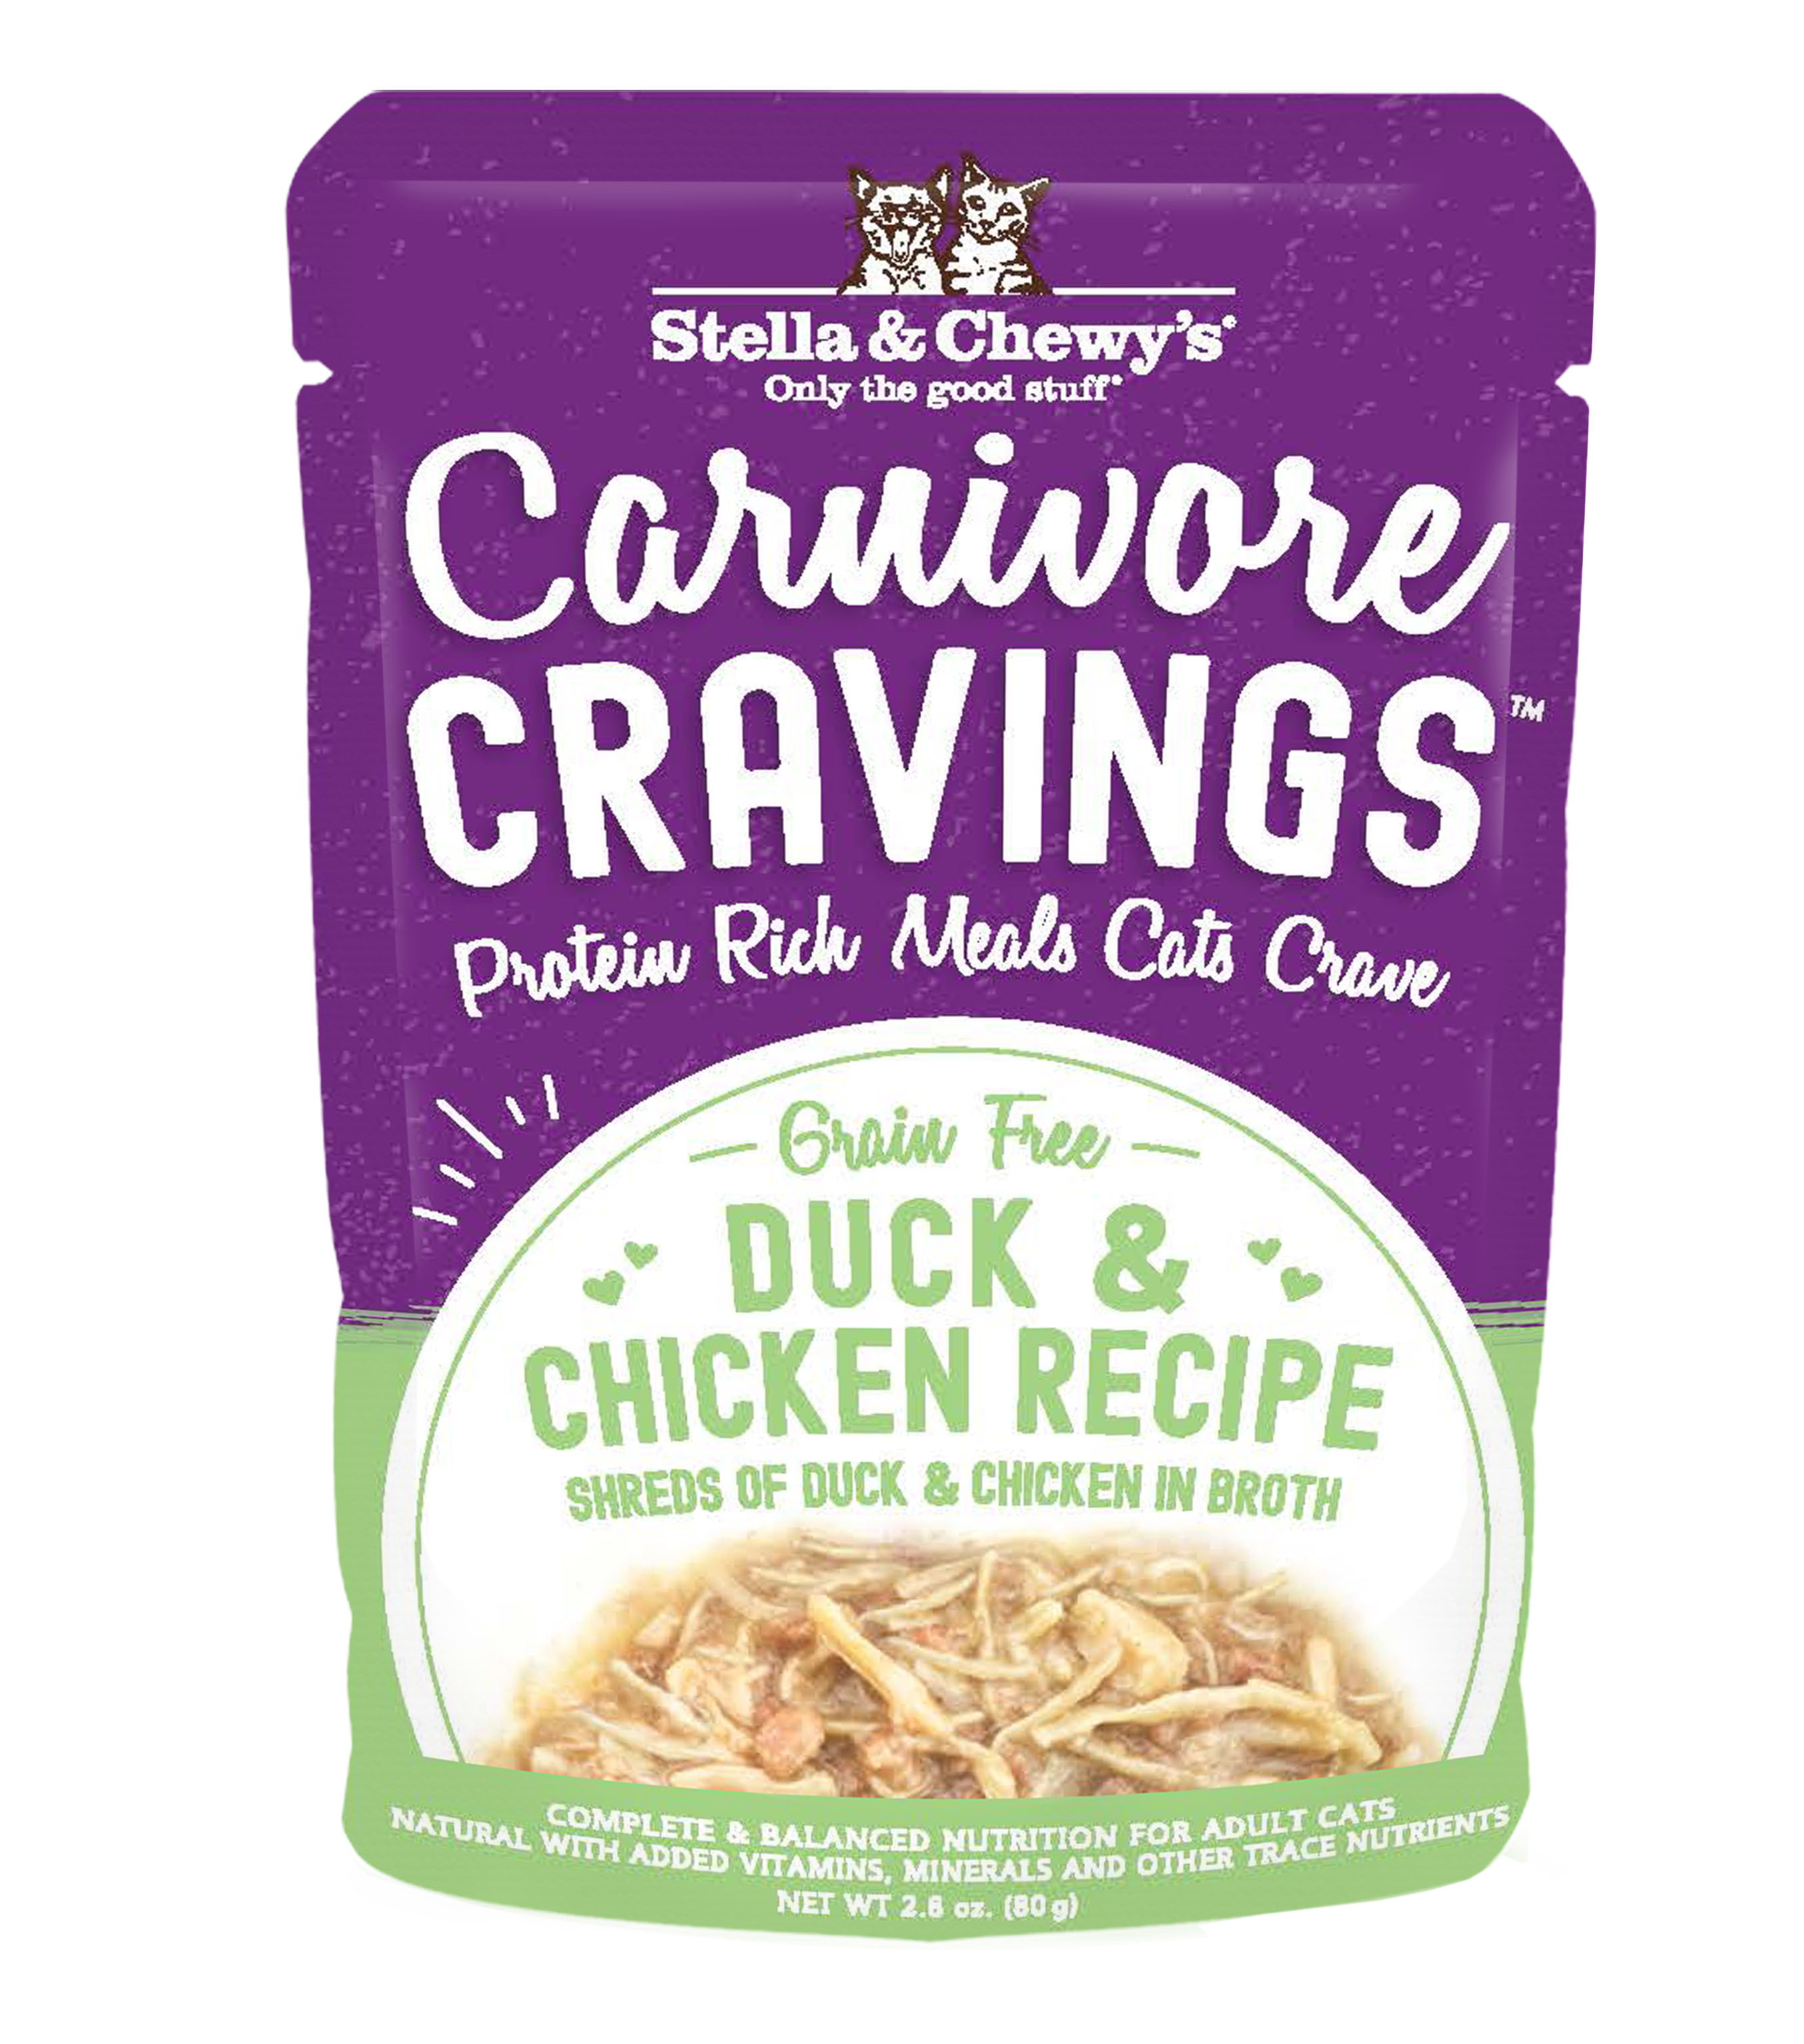 Stella & Chewy's Carnivore Cravings Wet Food Pouches For Cats 80g